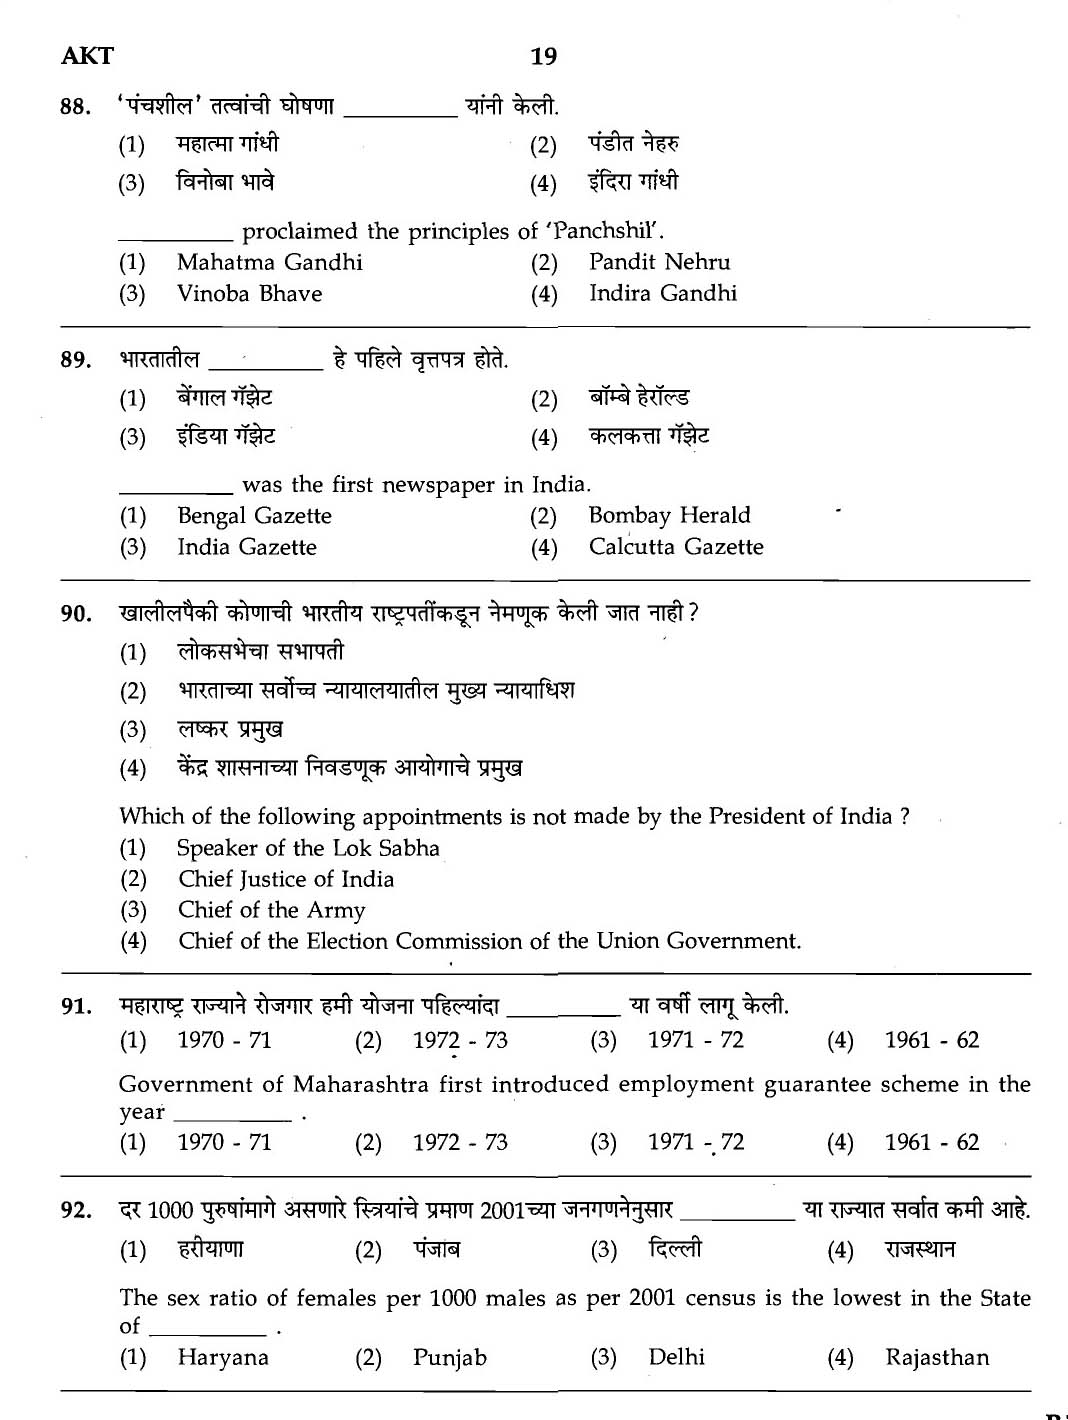 MPSC Agricultural Services Exam 2007 General Question Paper 17